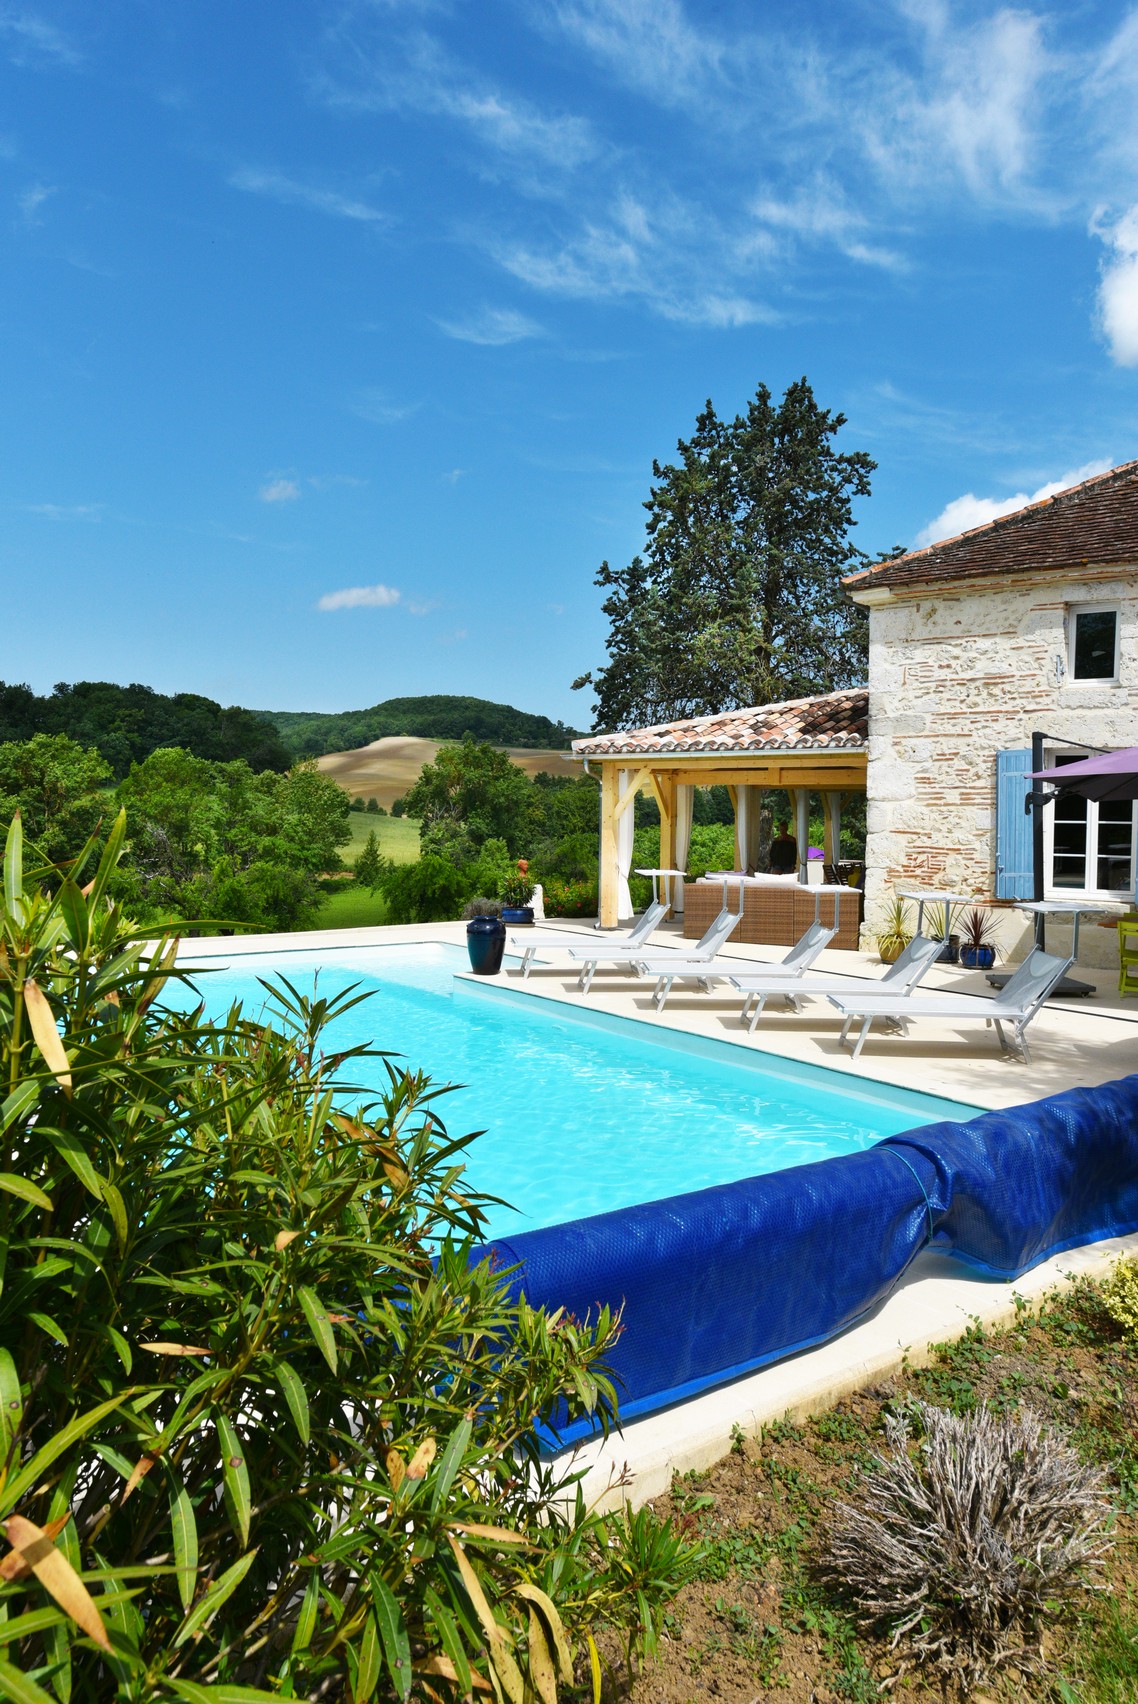 French Manoir holiday rental, white stone walls with blue shutters and pigieonnere tower, green lawn and shrubs